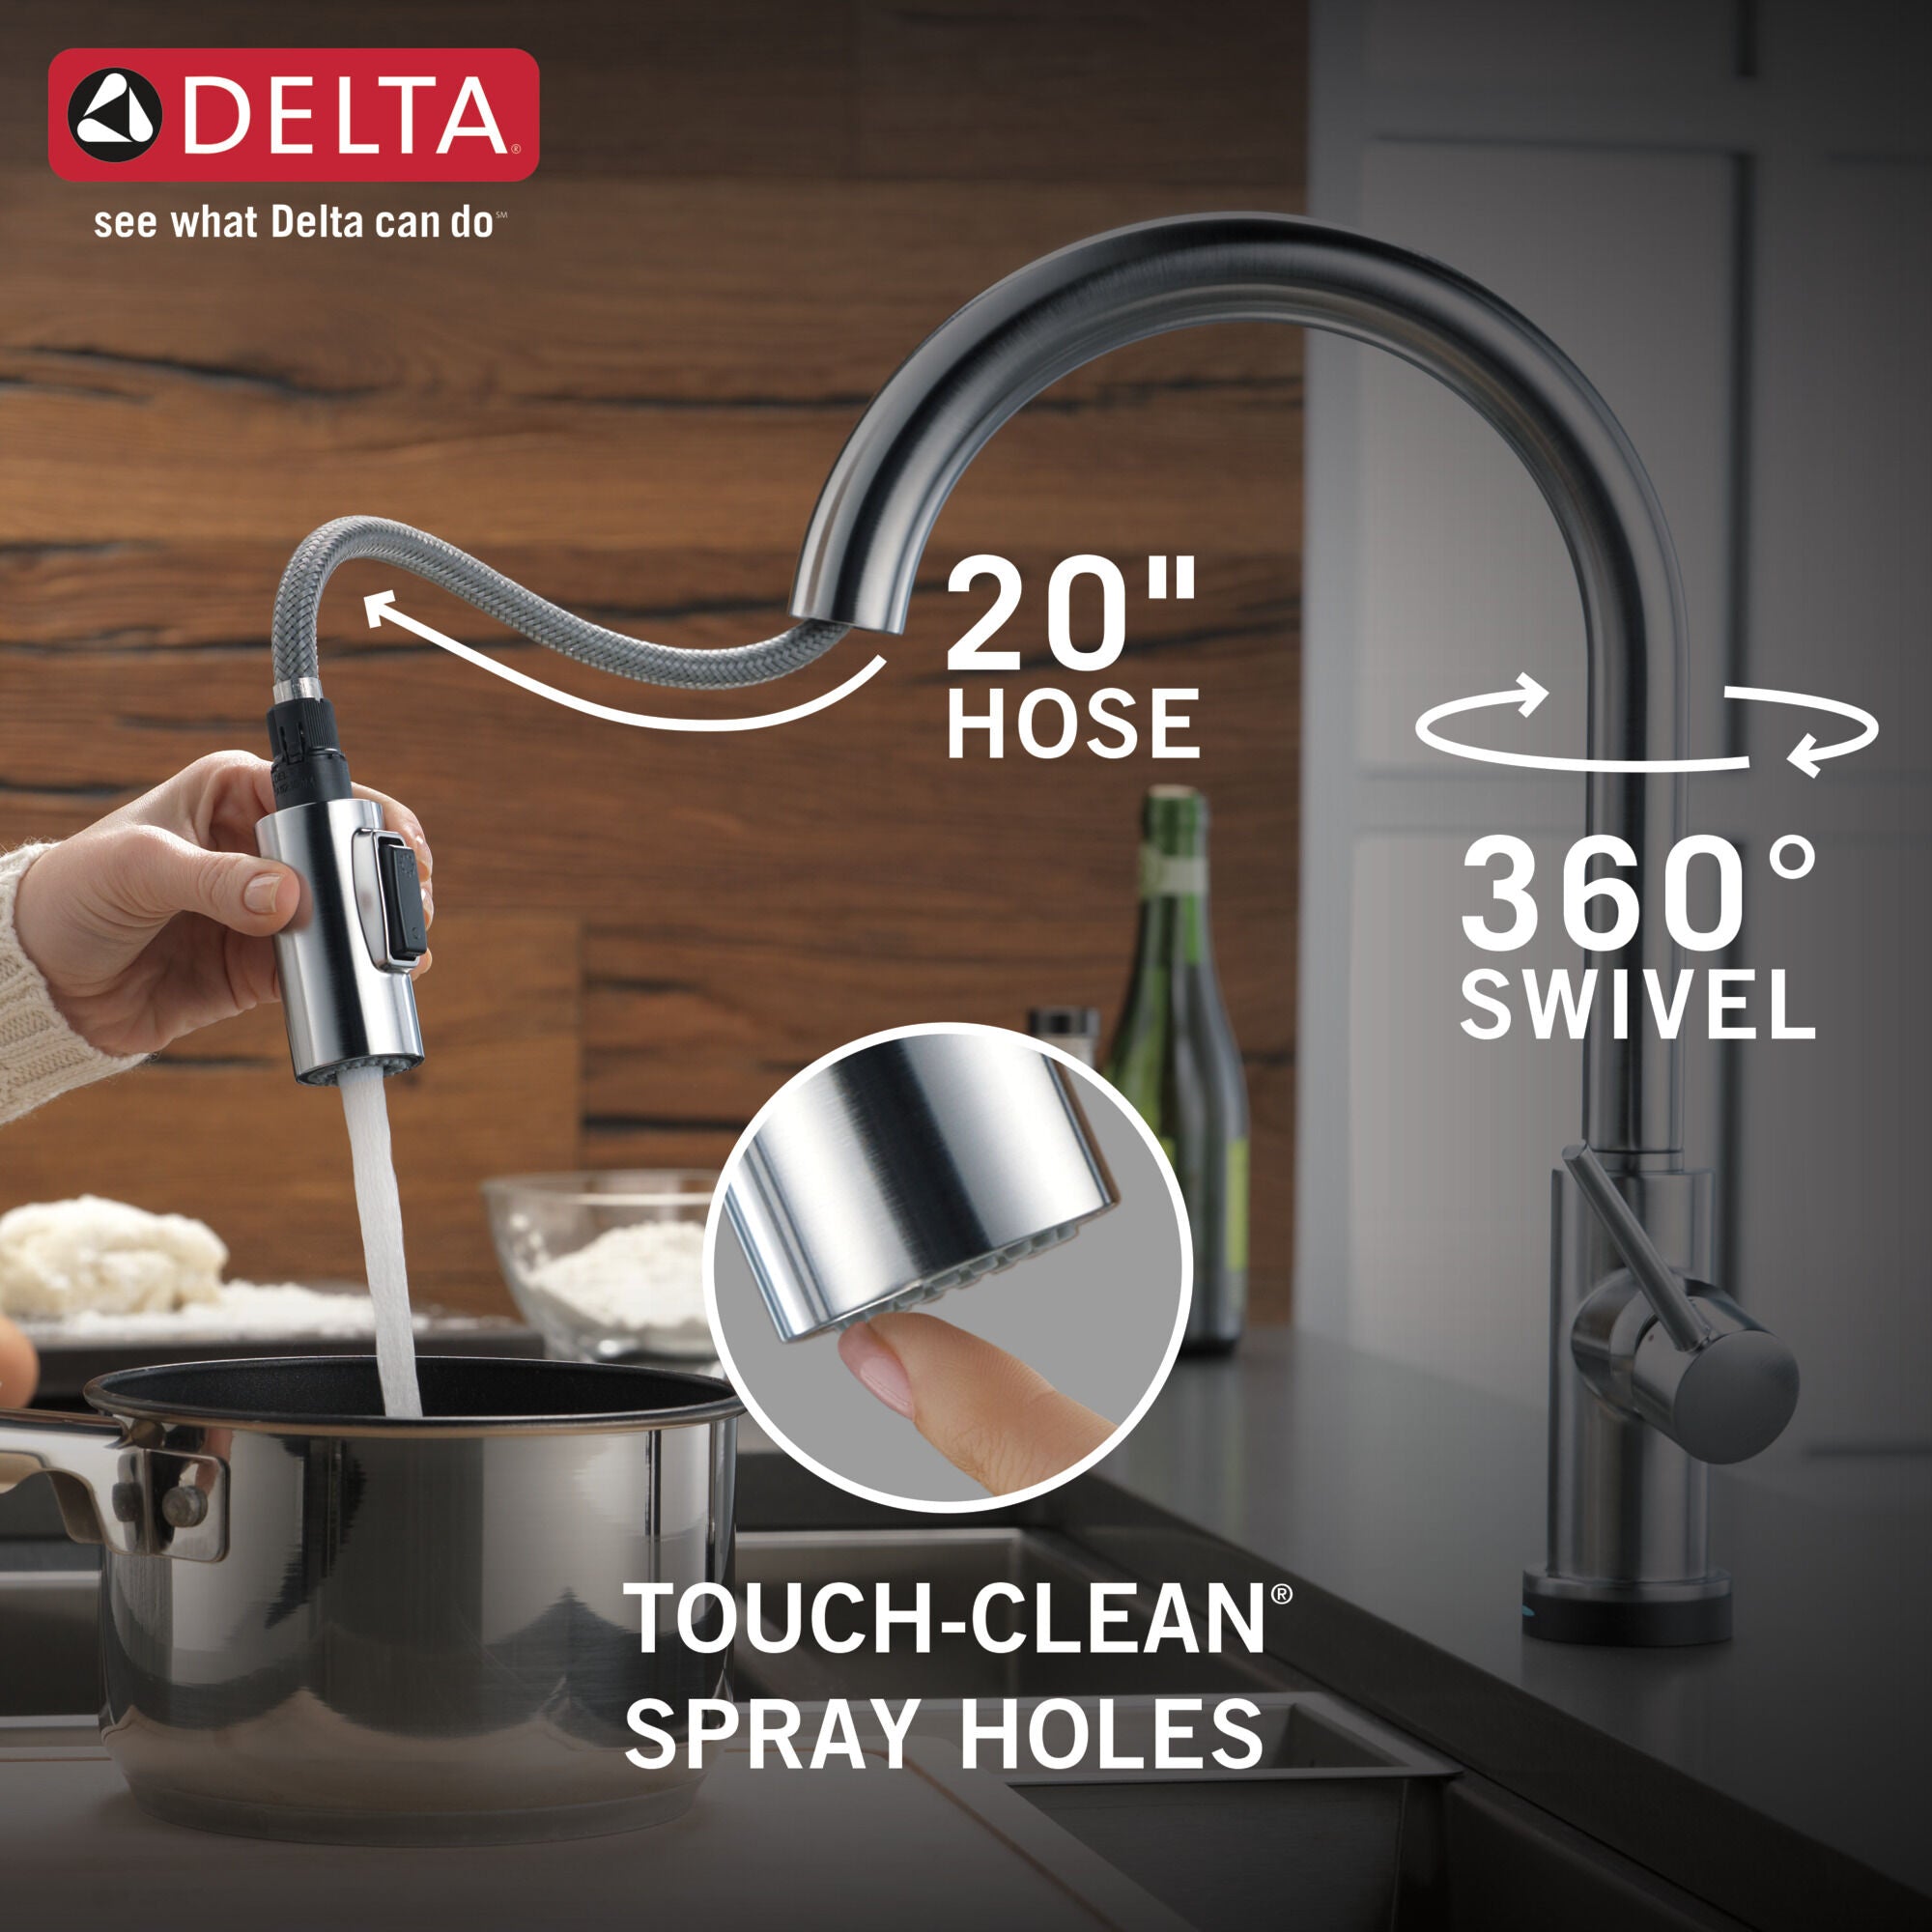 Delta Trinsic VoiceIQ™ Single-Handle Pull-Down Kitchen Faucet with TouchO Technology